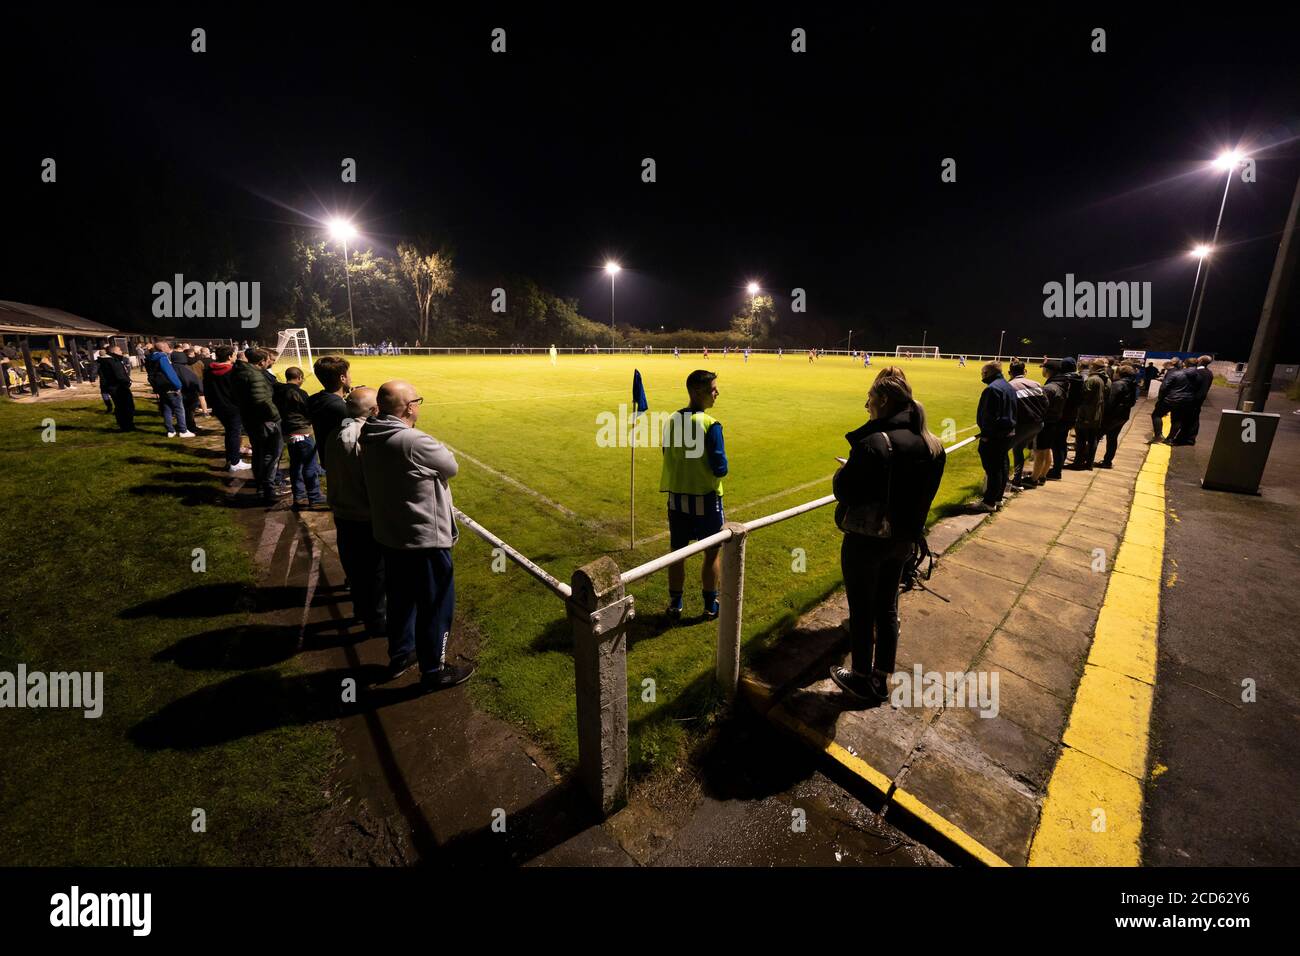 Bolton, UK. 26th August, 2020. Bury AFC supporters watch their teamÕs first competitive game in public, a Challenge match away to fellow North West Counties First Division North side Daisy Hill in the Westhoughton area of Bolton, UK. The Shakers phoenix club have played training games but it was announced on Monday that fans will be able to attend the game. Credit: Jon Super/Alamy Live News. Stock Photo